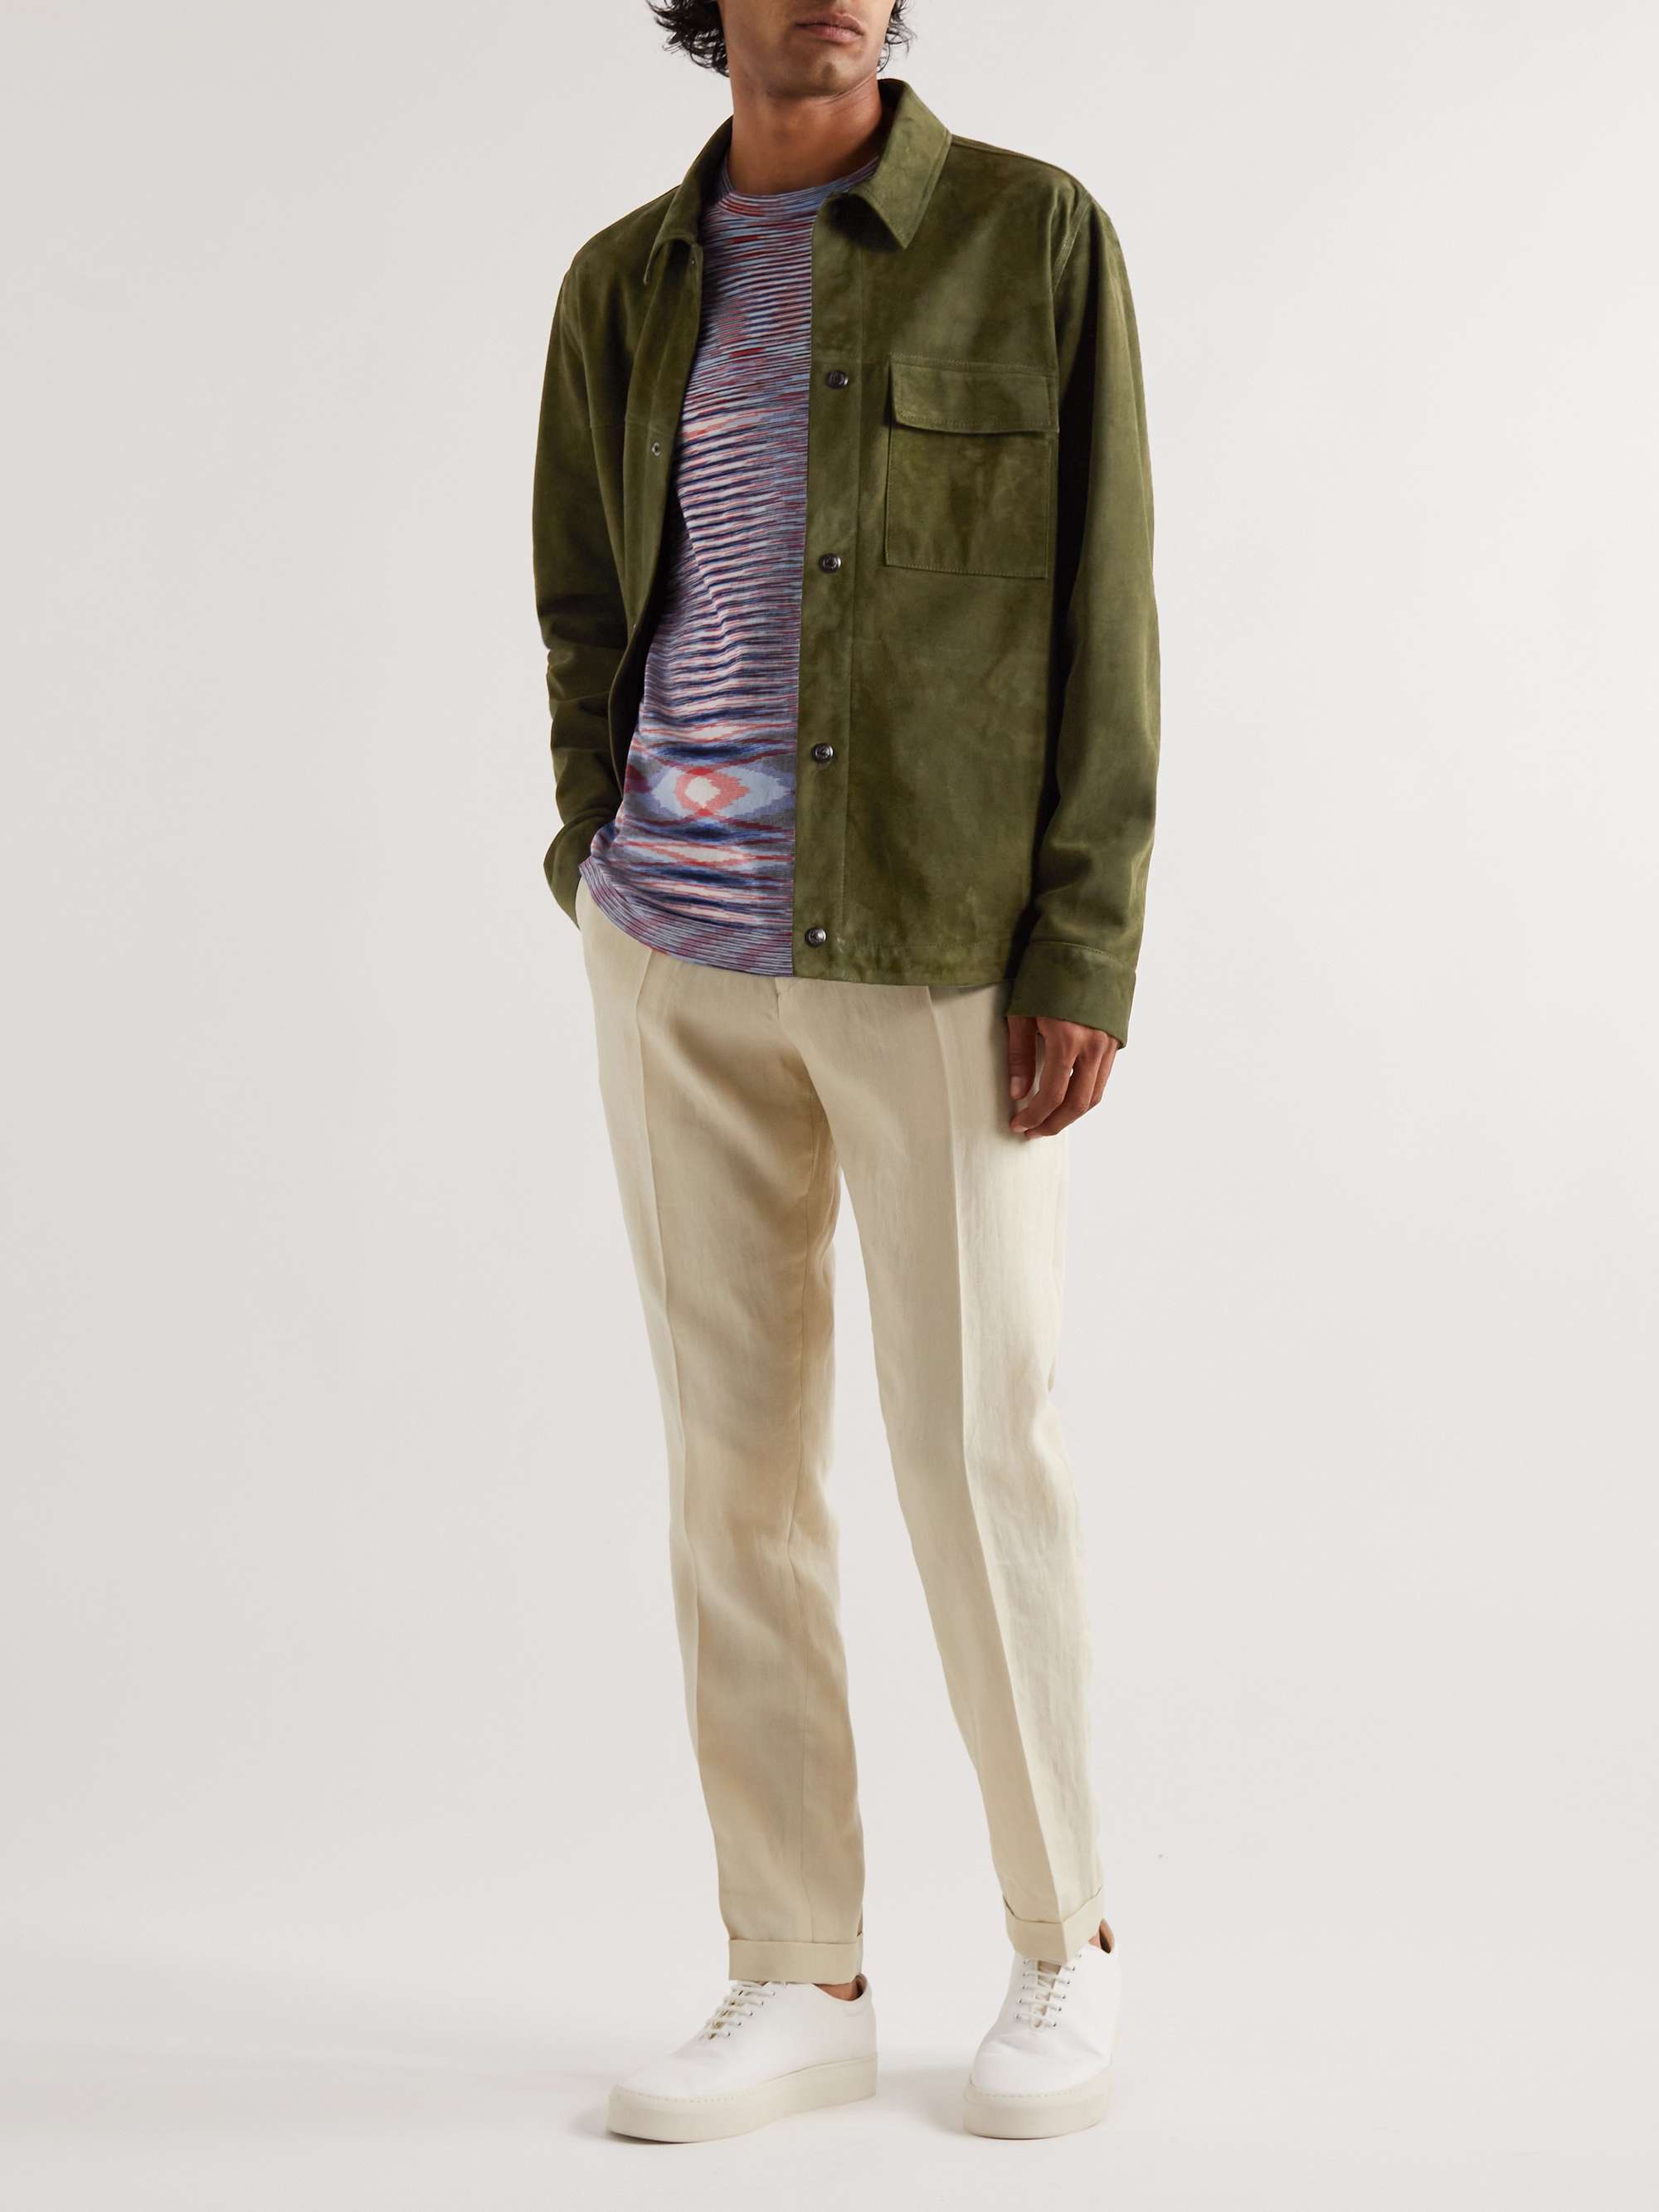 Green Suede Shirt Jacket | PAUL SMITH | MR PORTER